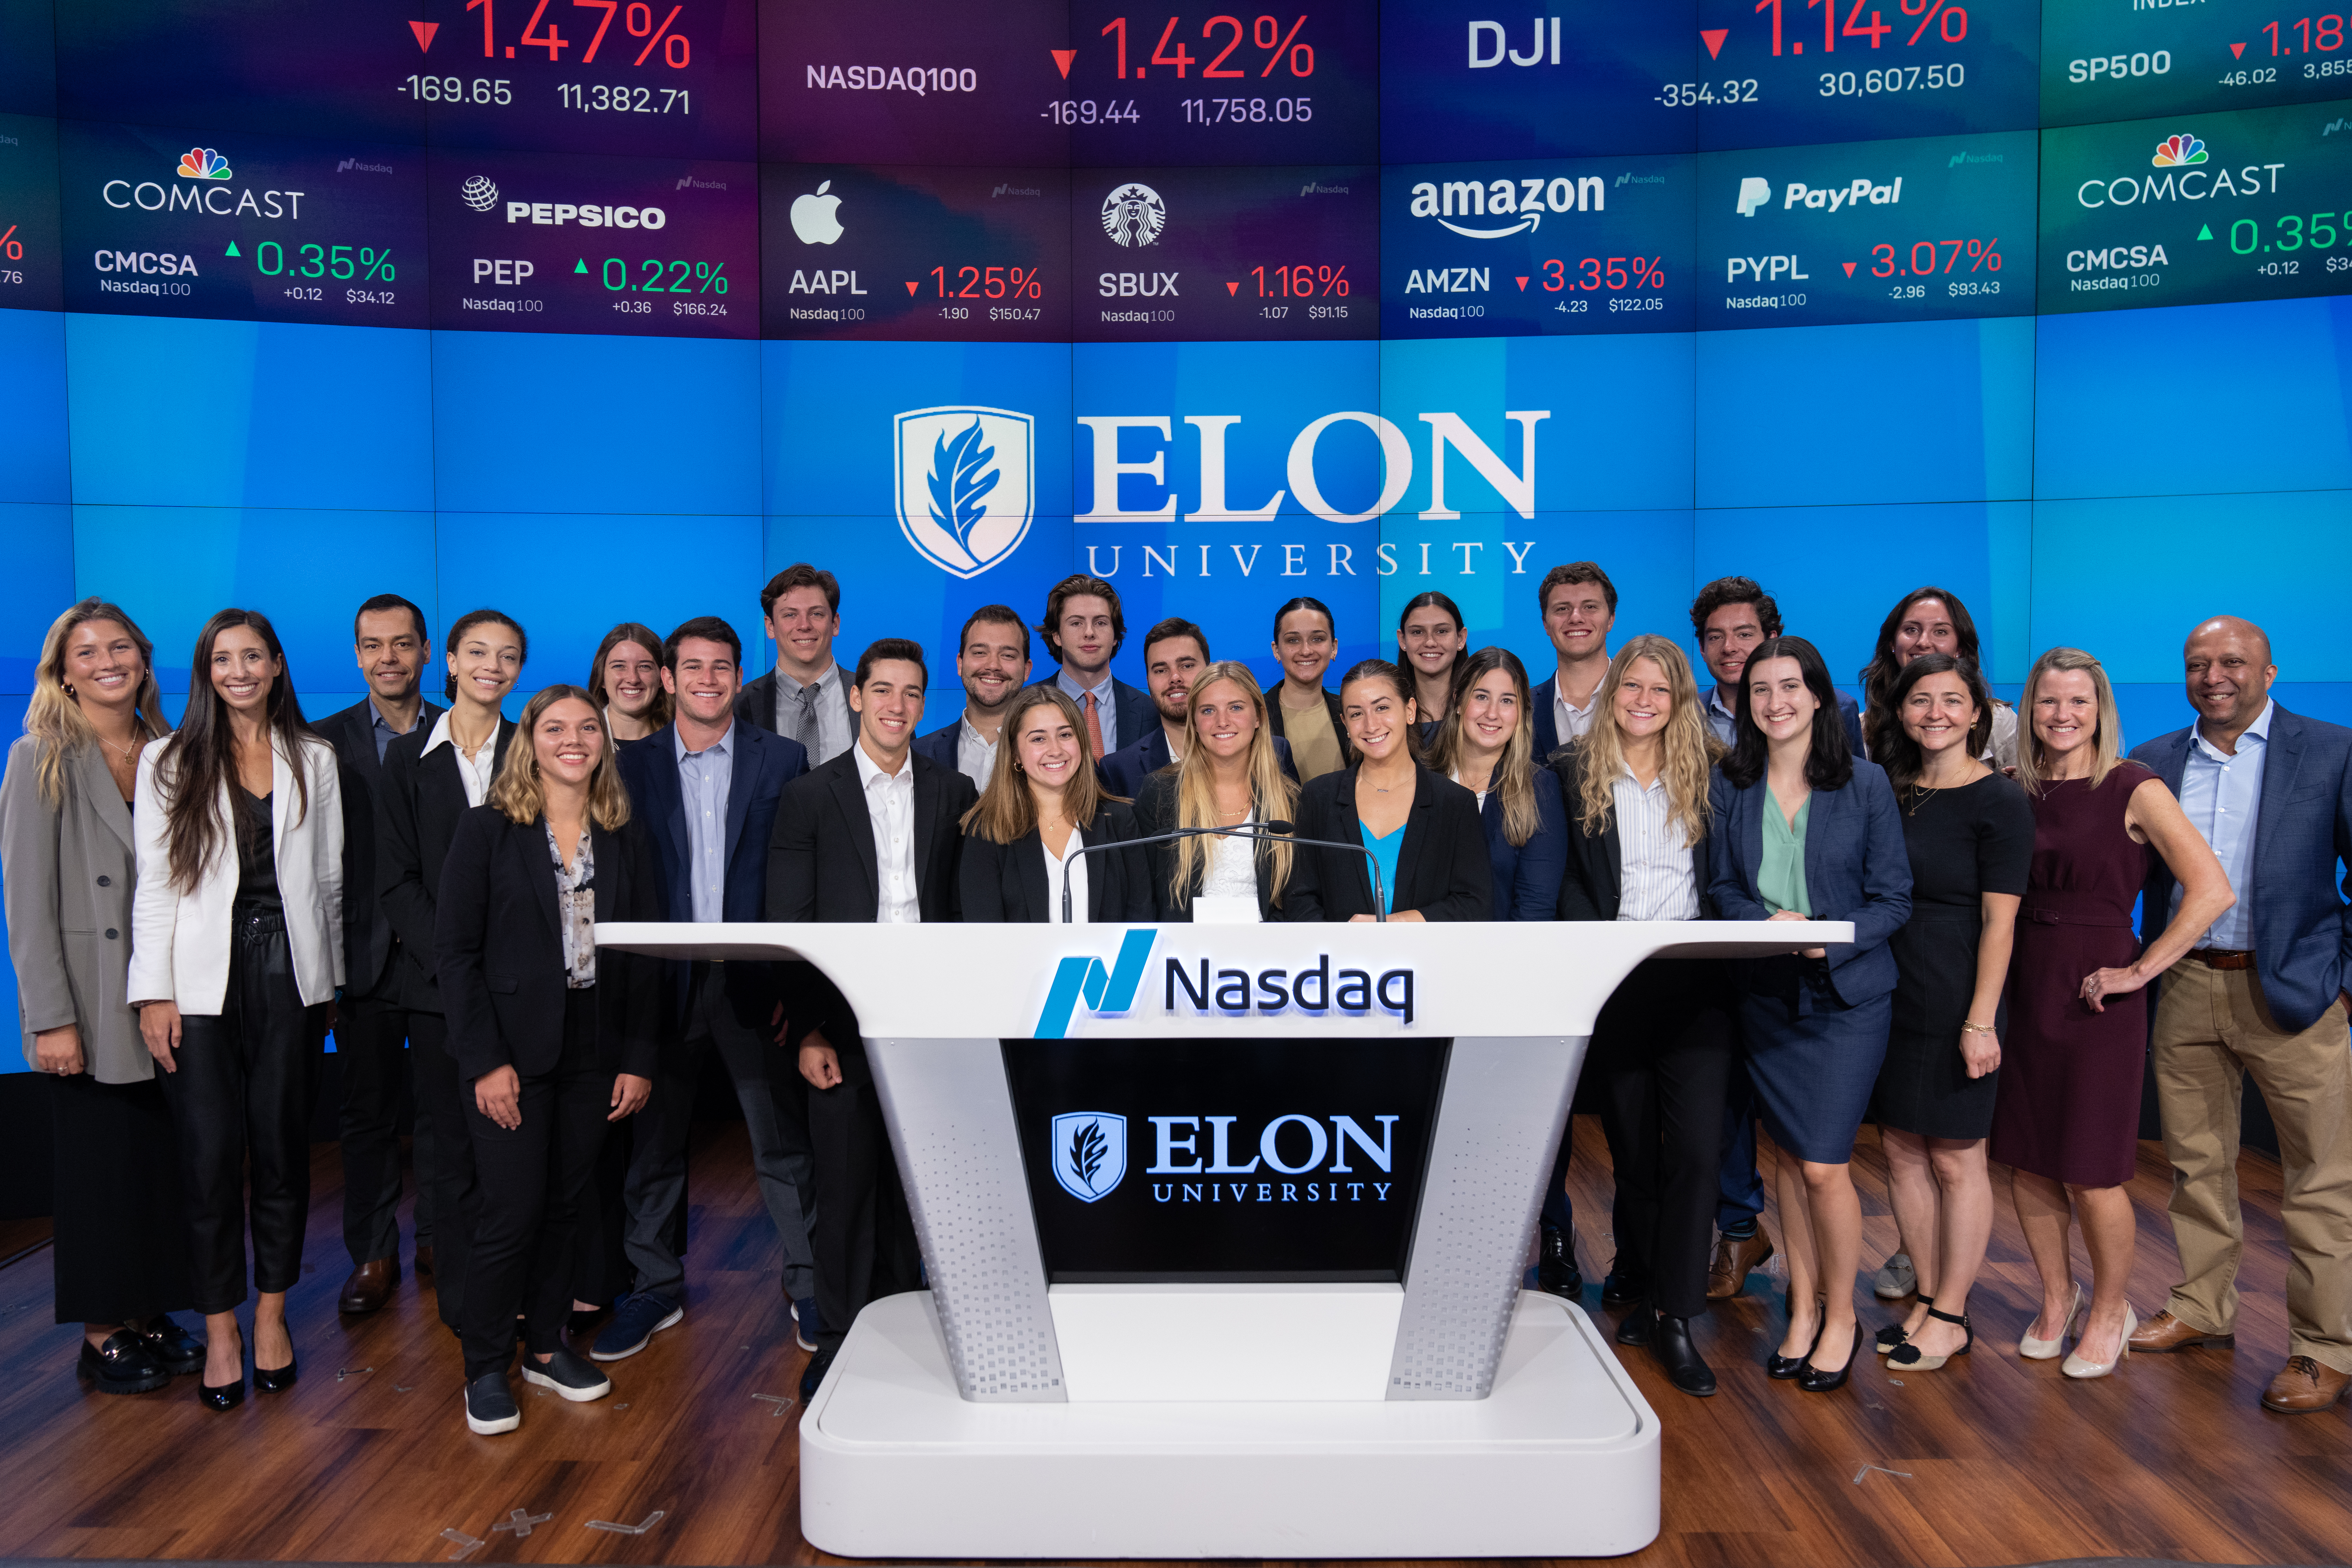 Group of students, faculty and staff standing behind a lectern with the Nasdaq logo and an Elon sign behind them.